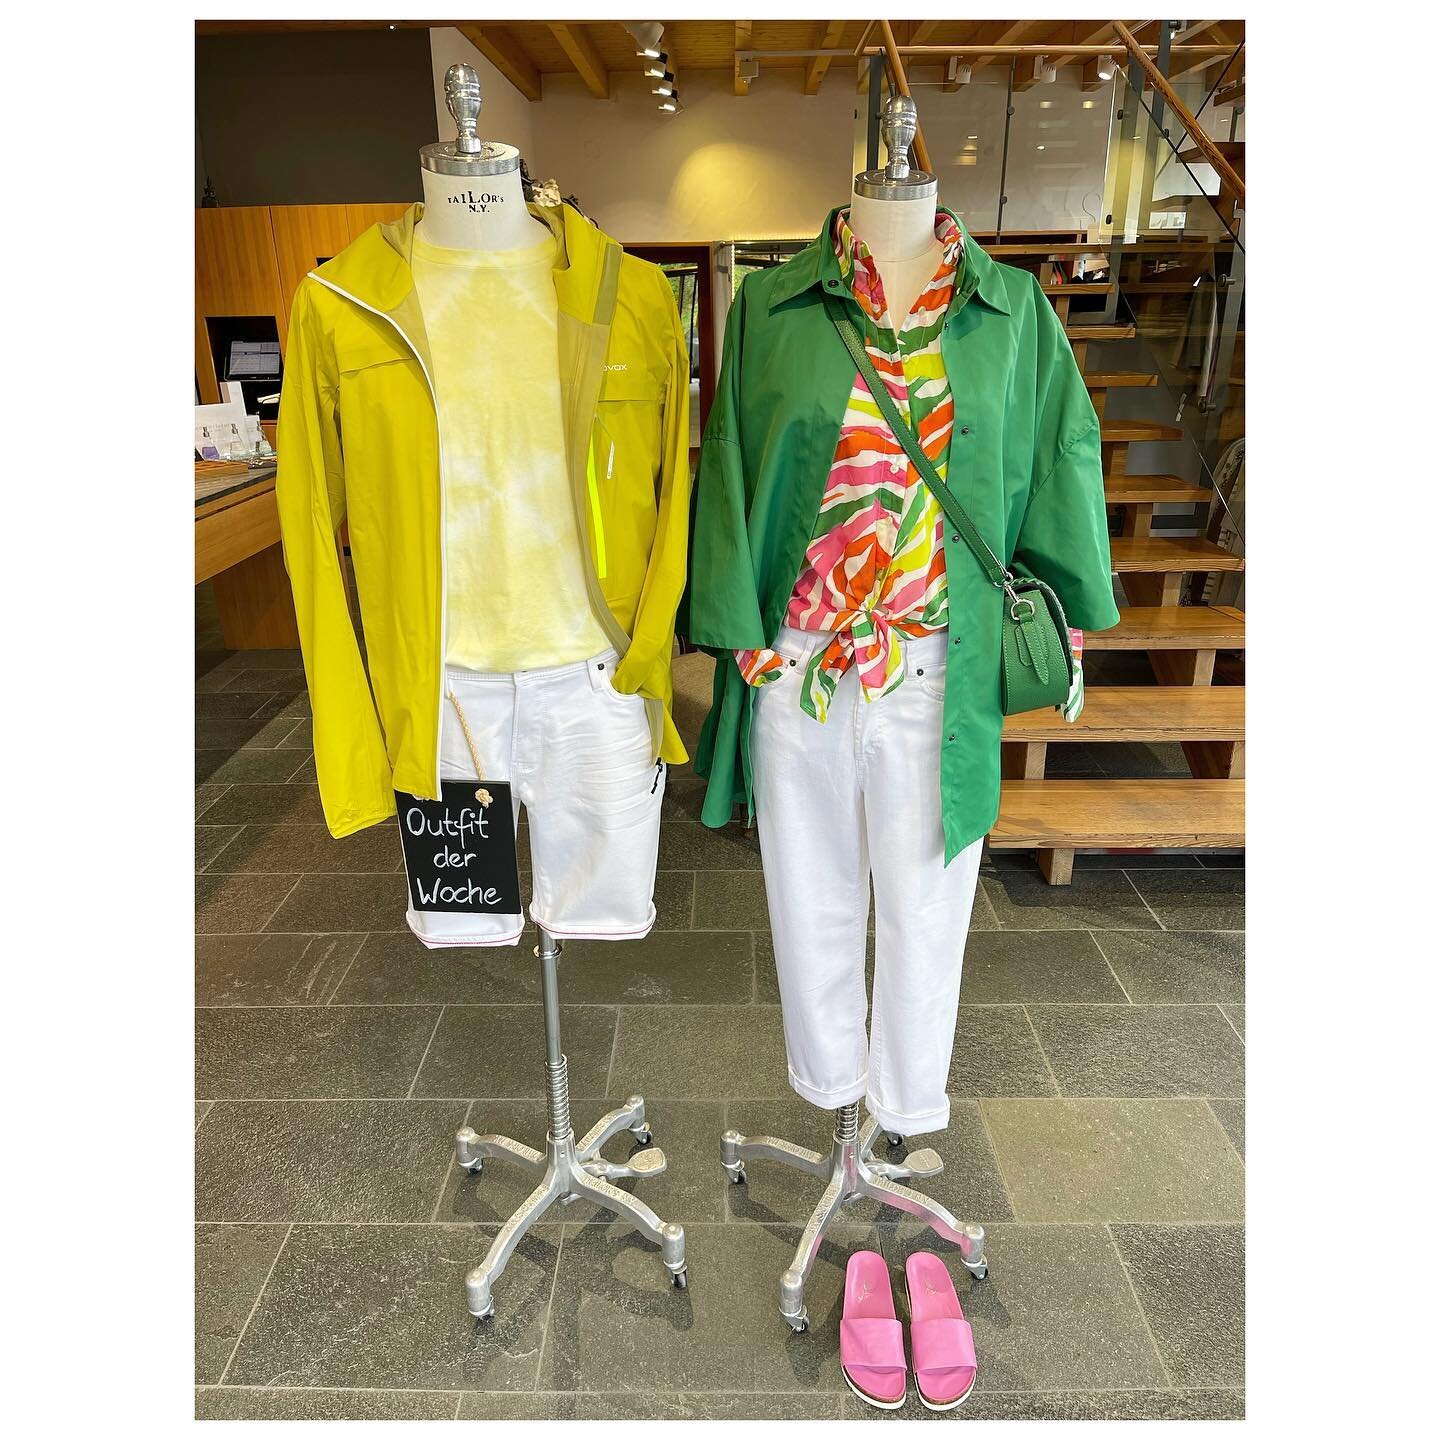 Outfit der Woche #19

In the days of summer rain..

#ootw #outfitderwoche #outfitoftheweek #colorful #summerstyling #shopping #fashion #readyforsummerrain